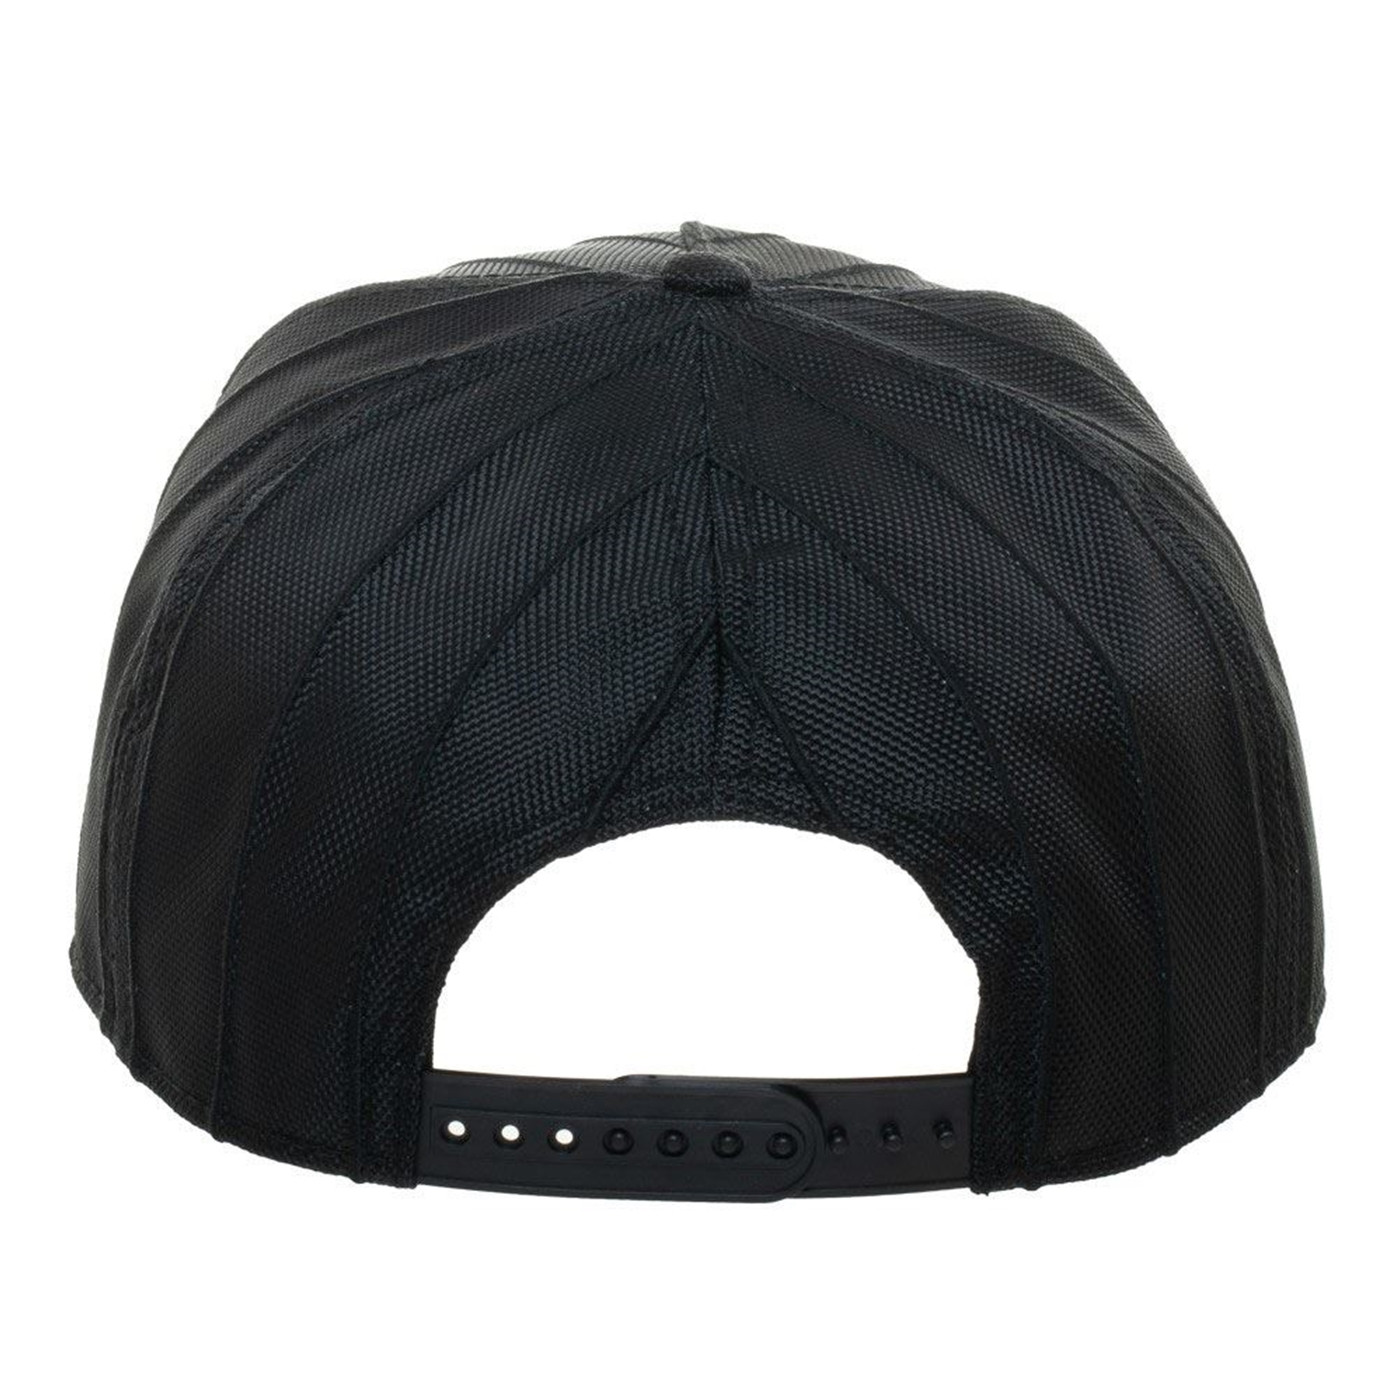 Spider-Man Far From Home Stealth Suit Snapback